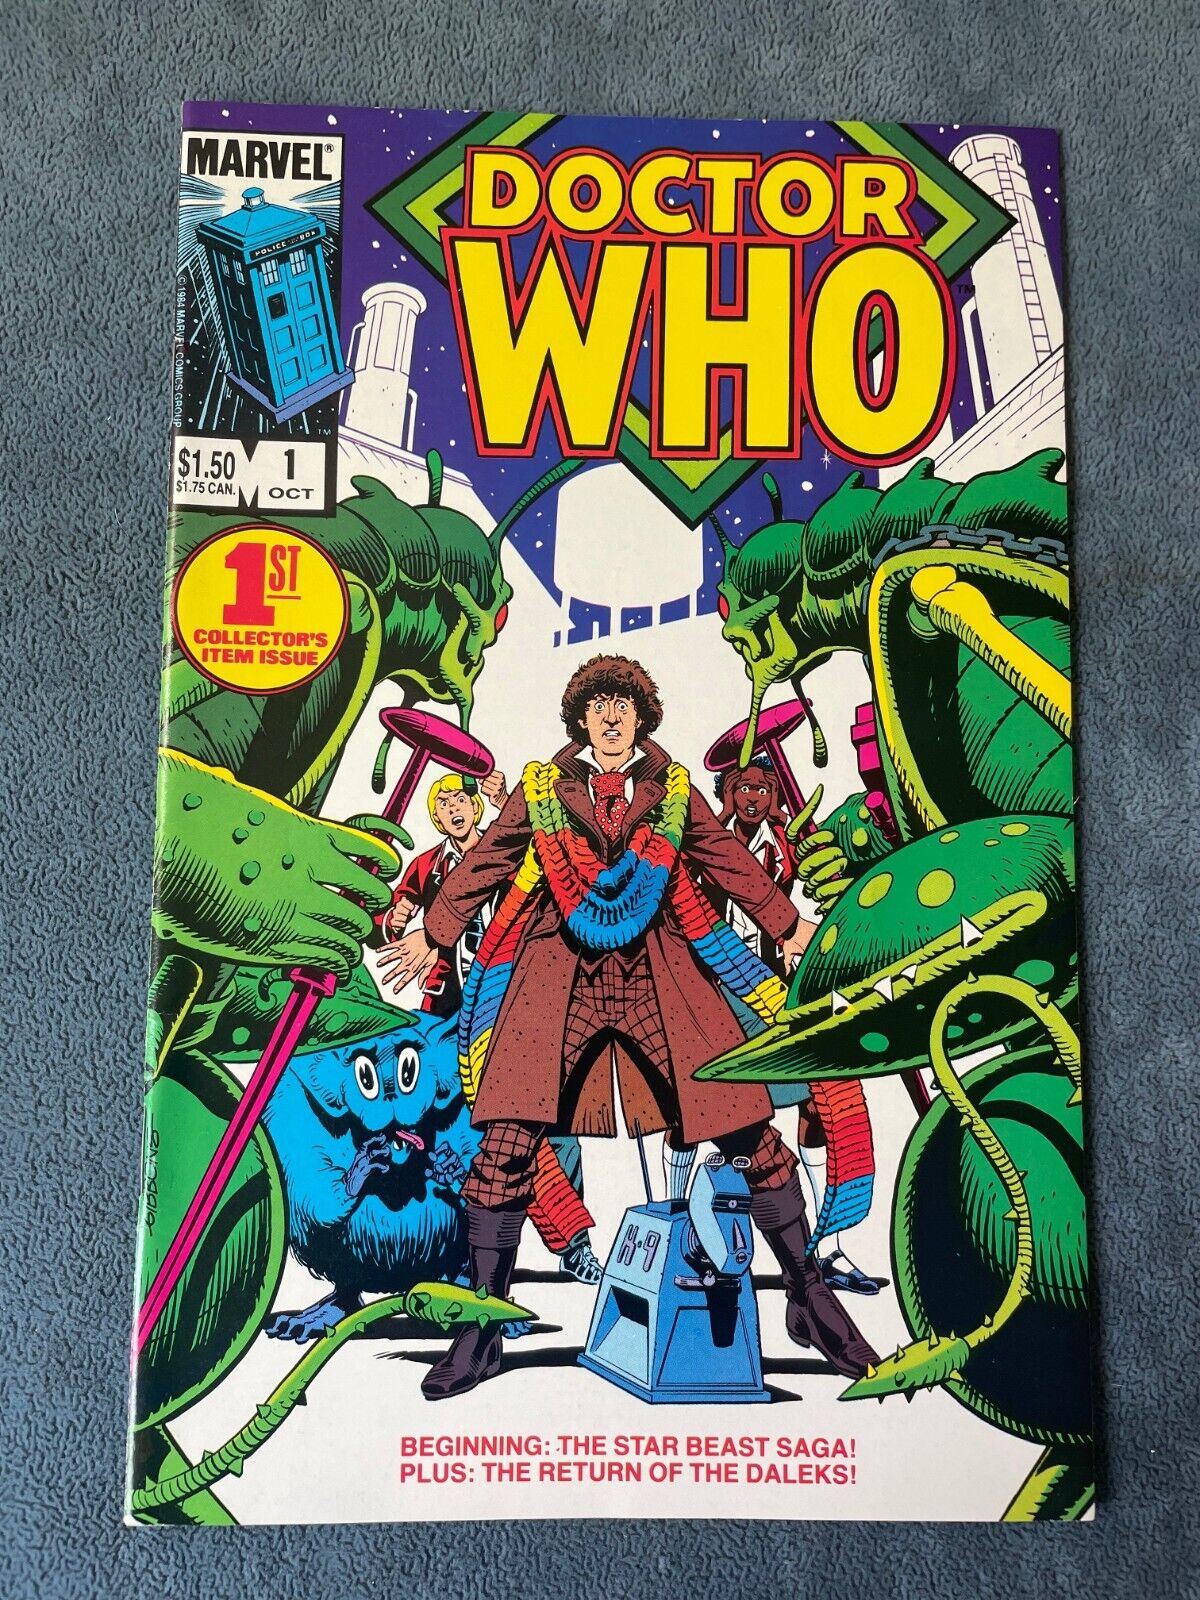 Doctor Who #1 1984 Marvel Comic Book John Wagner Dave Gibbons Cover NM